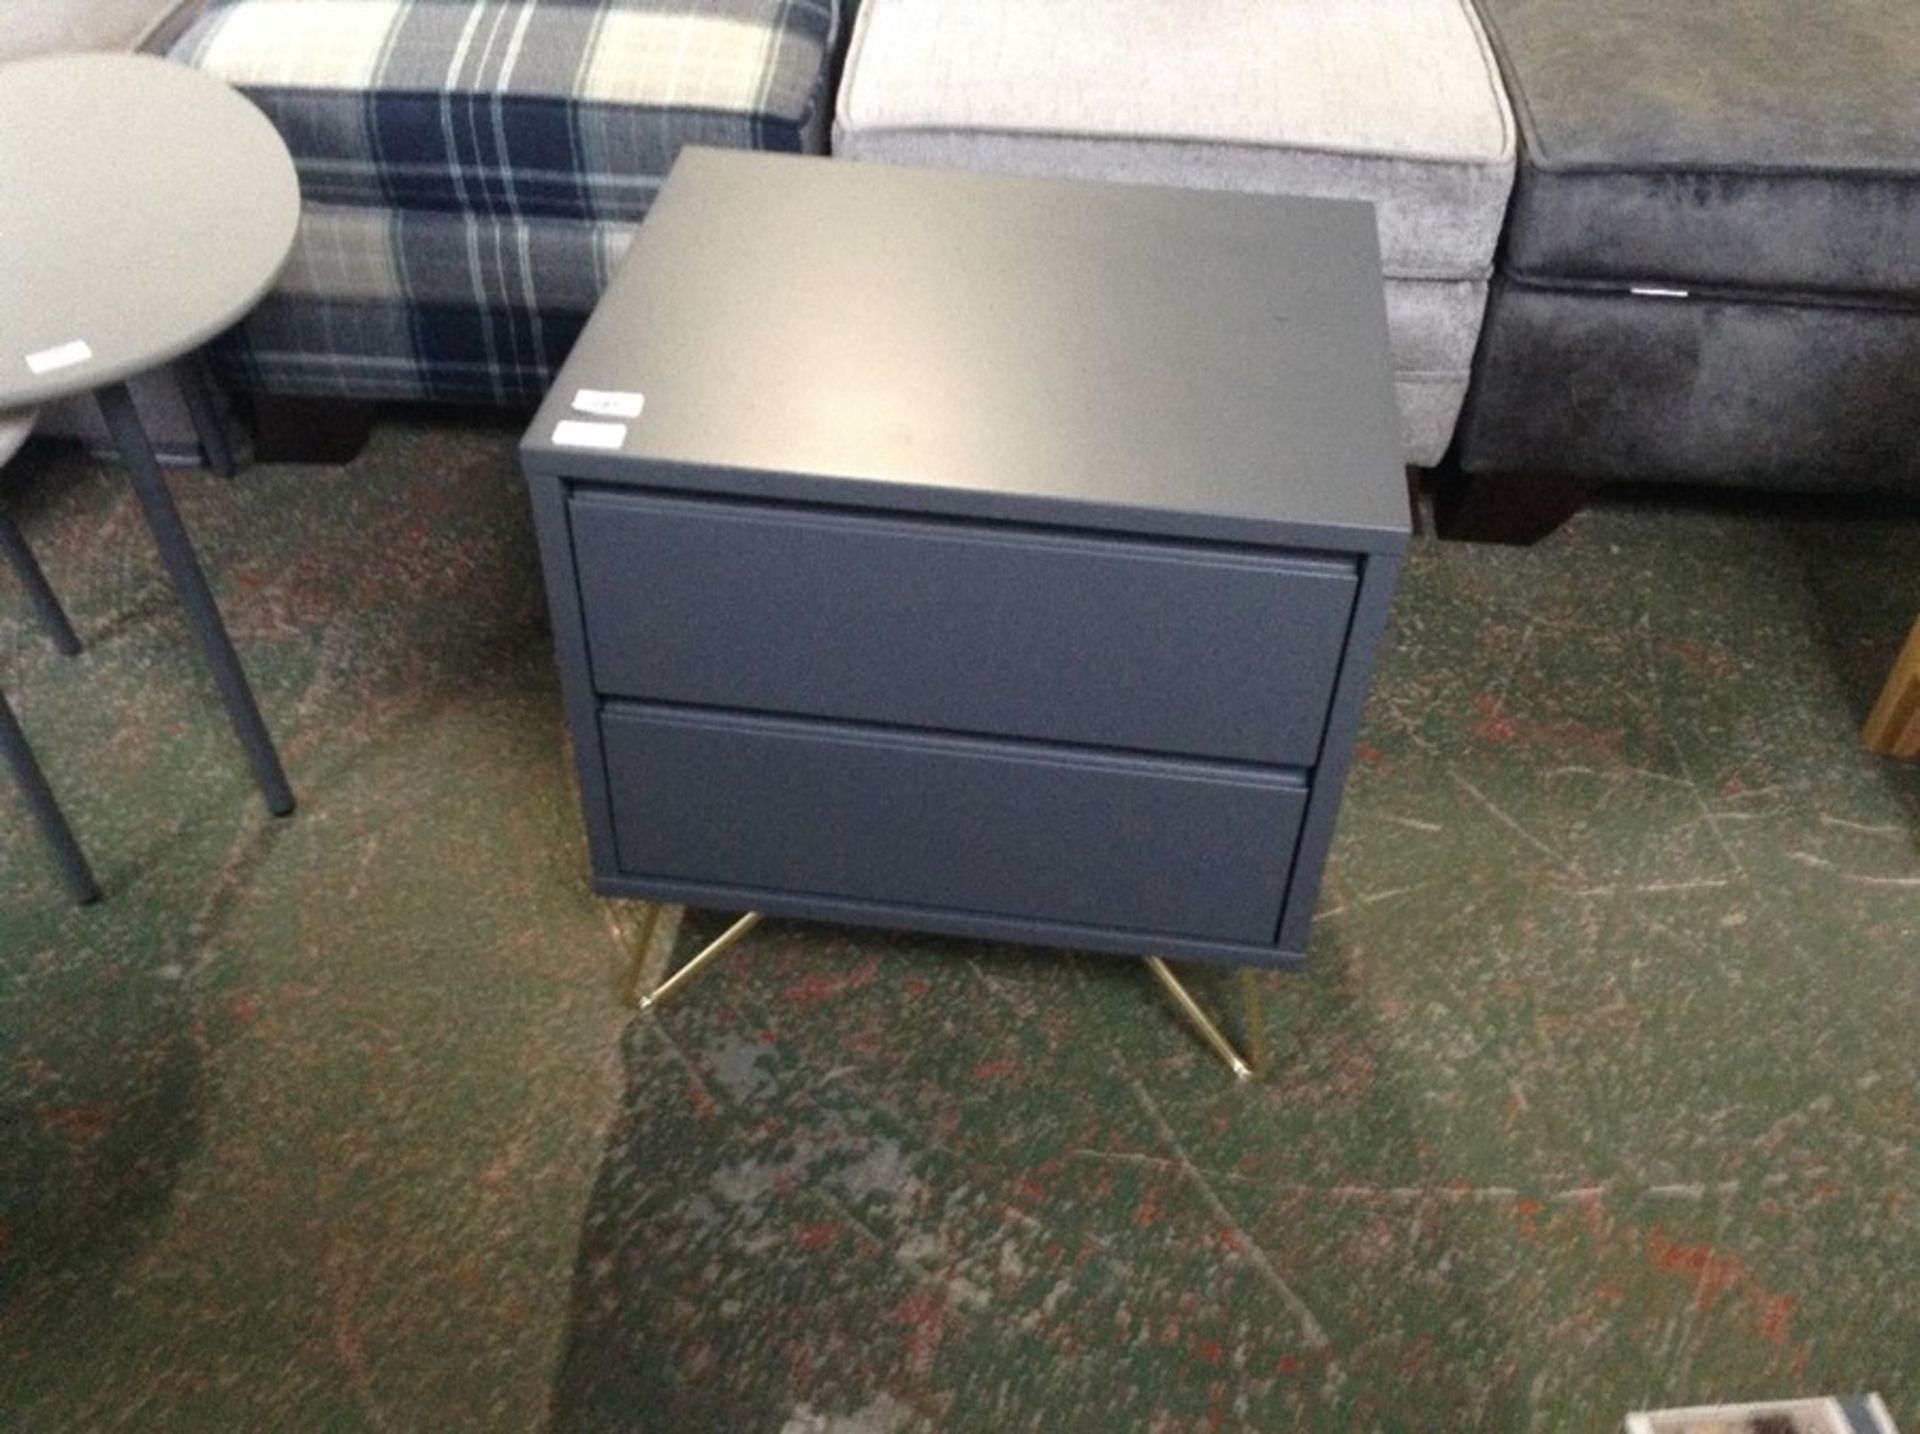 | x1 | Elona Bedside Table, Charcoal and Brass| RRP £129 | MAD-STLELN015BLU-UK |